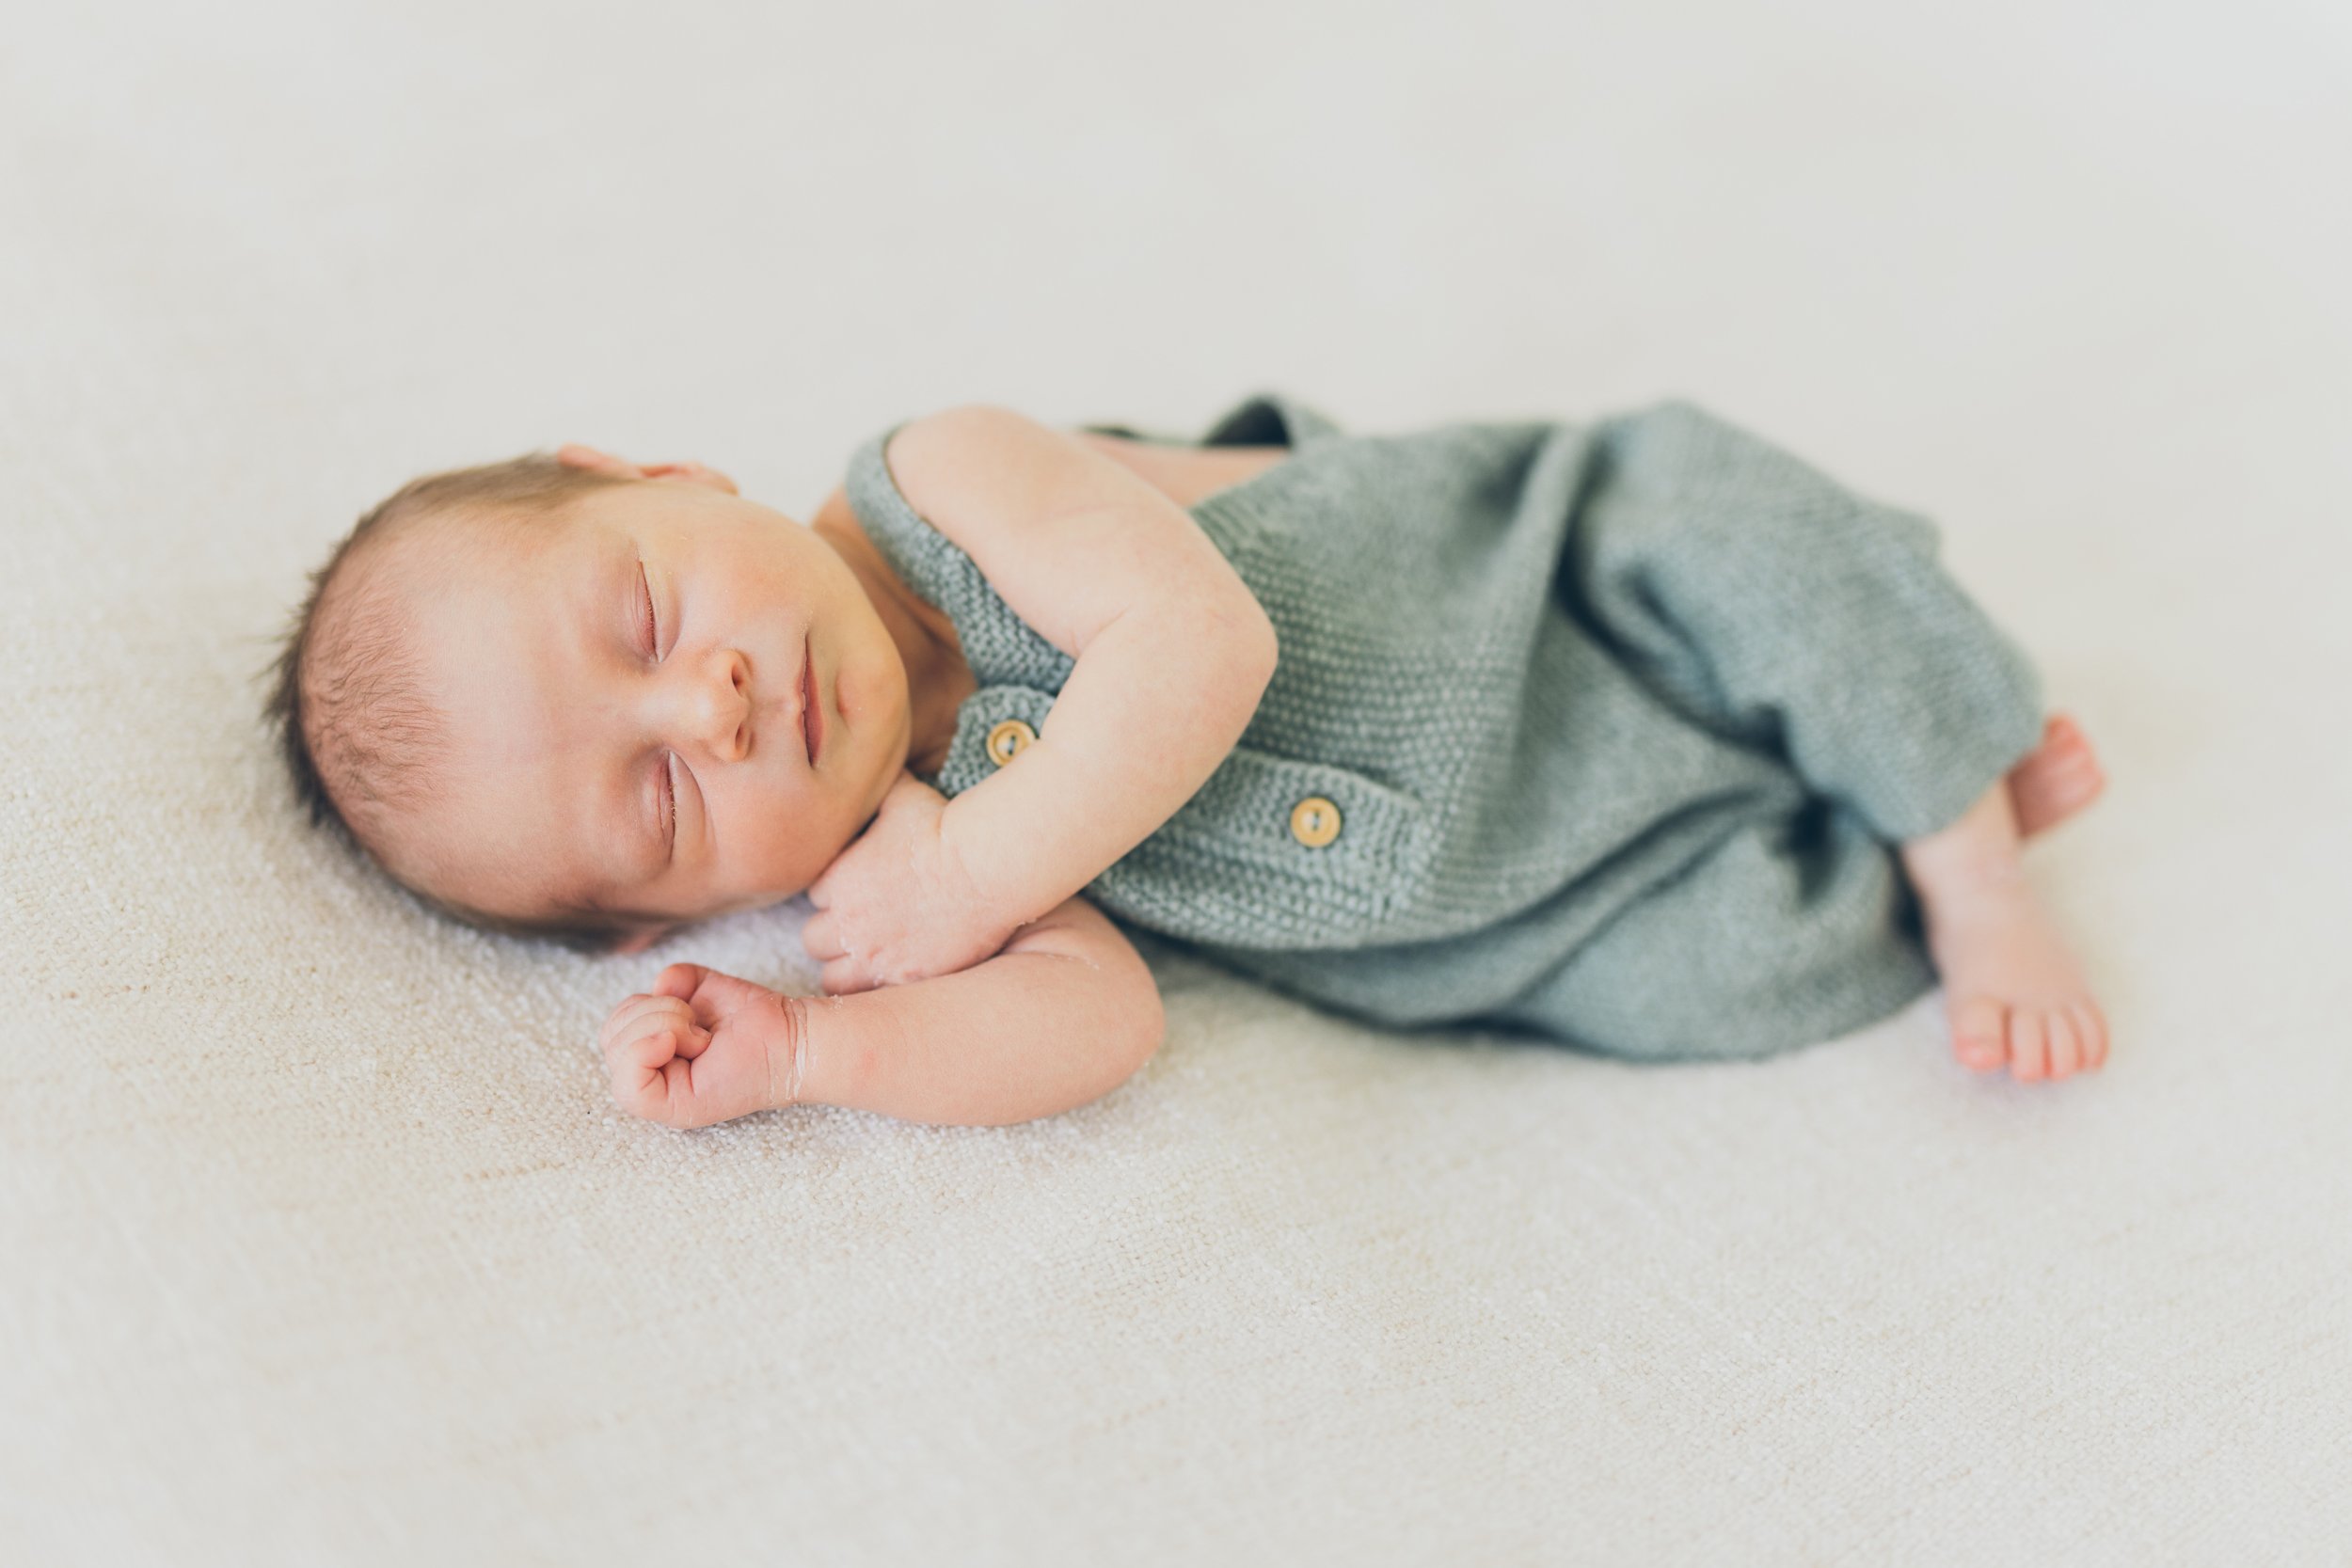  A newborn baby boy wearing a green knitted outfit in RinkaDink Studio Belfast Northern Ireland. 